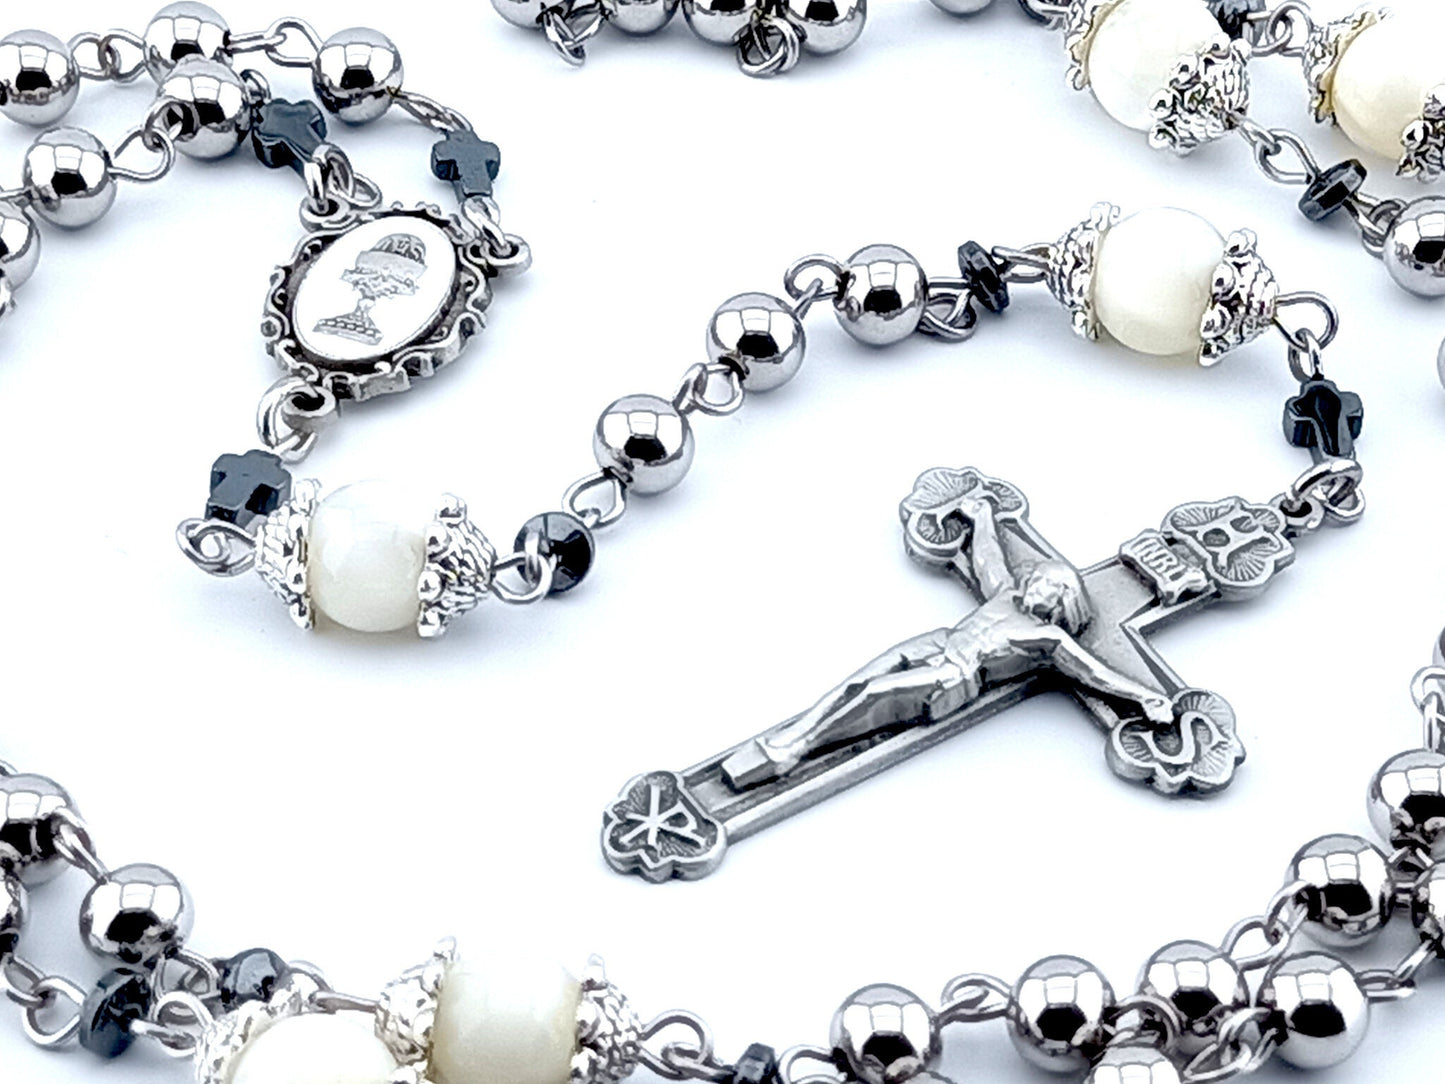 First Holy Communion unique rosary beads with stainless steel beads and wire, pewter crucifix and centre medal, mother of pearl pater beads and silver bead caps.